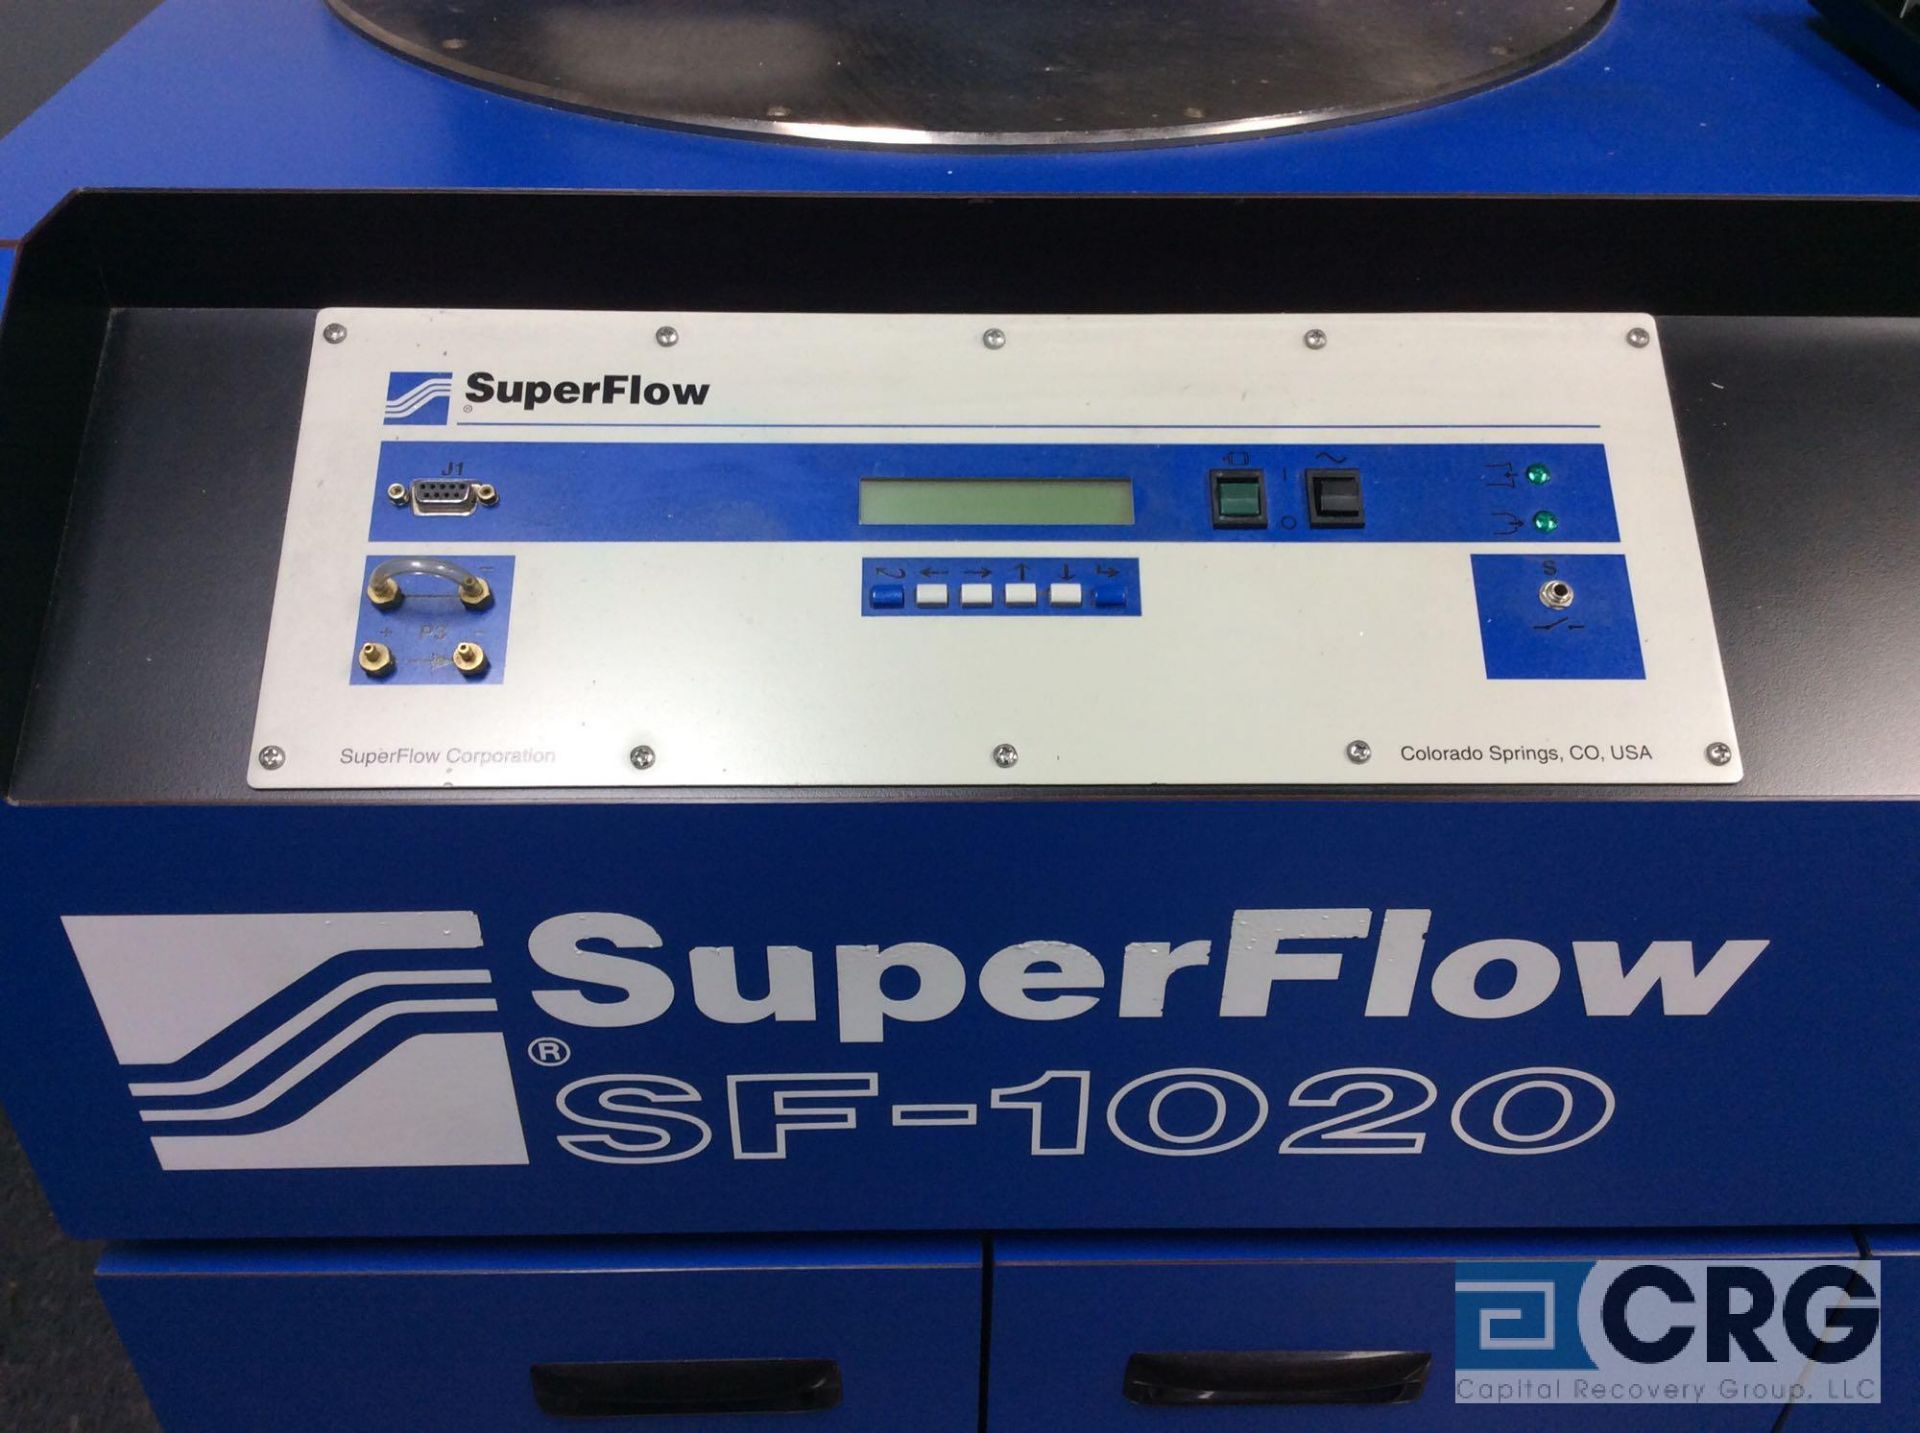 SuperFlow SF1020 Probench computerized flowbench with computer, printer, accessories - Image 3 of 5